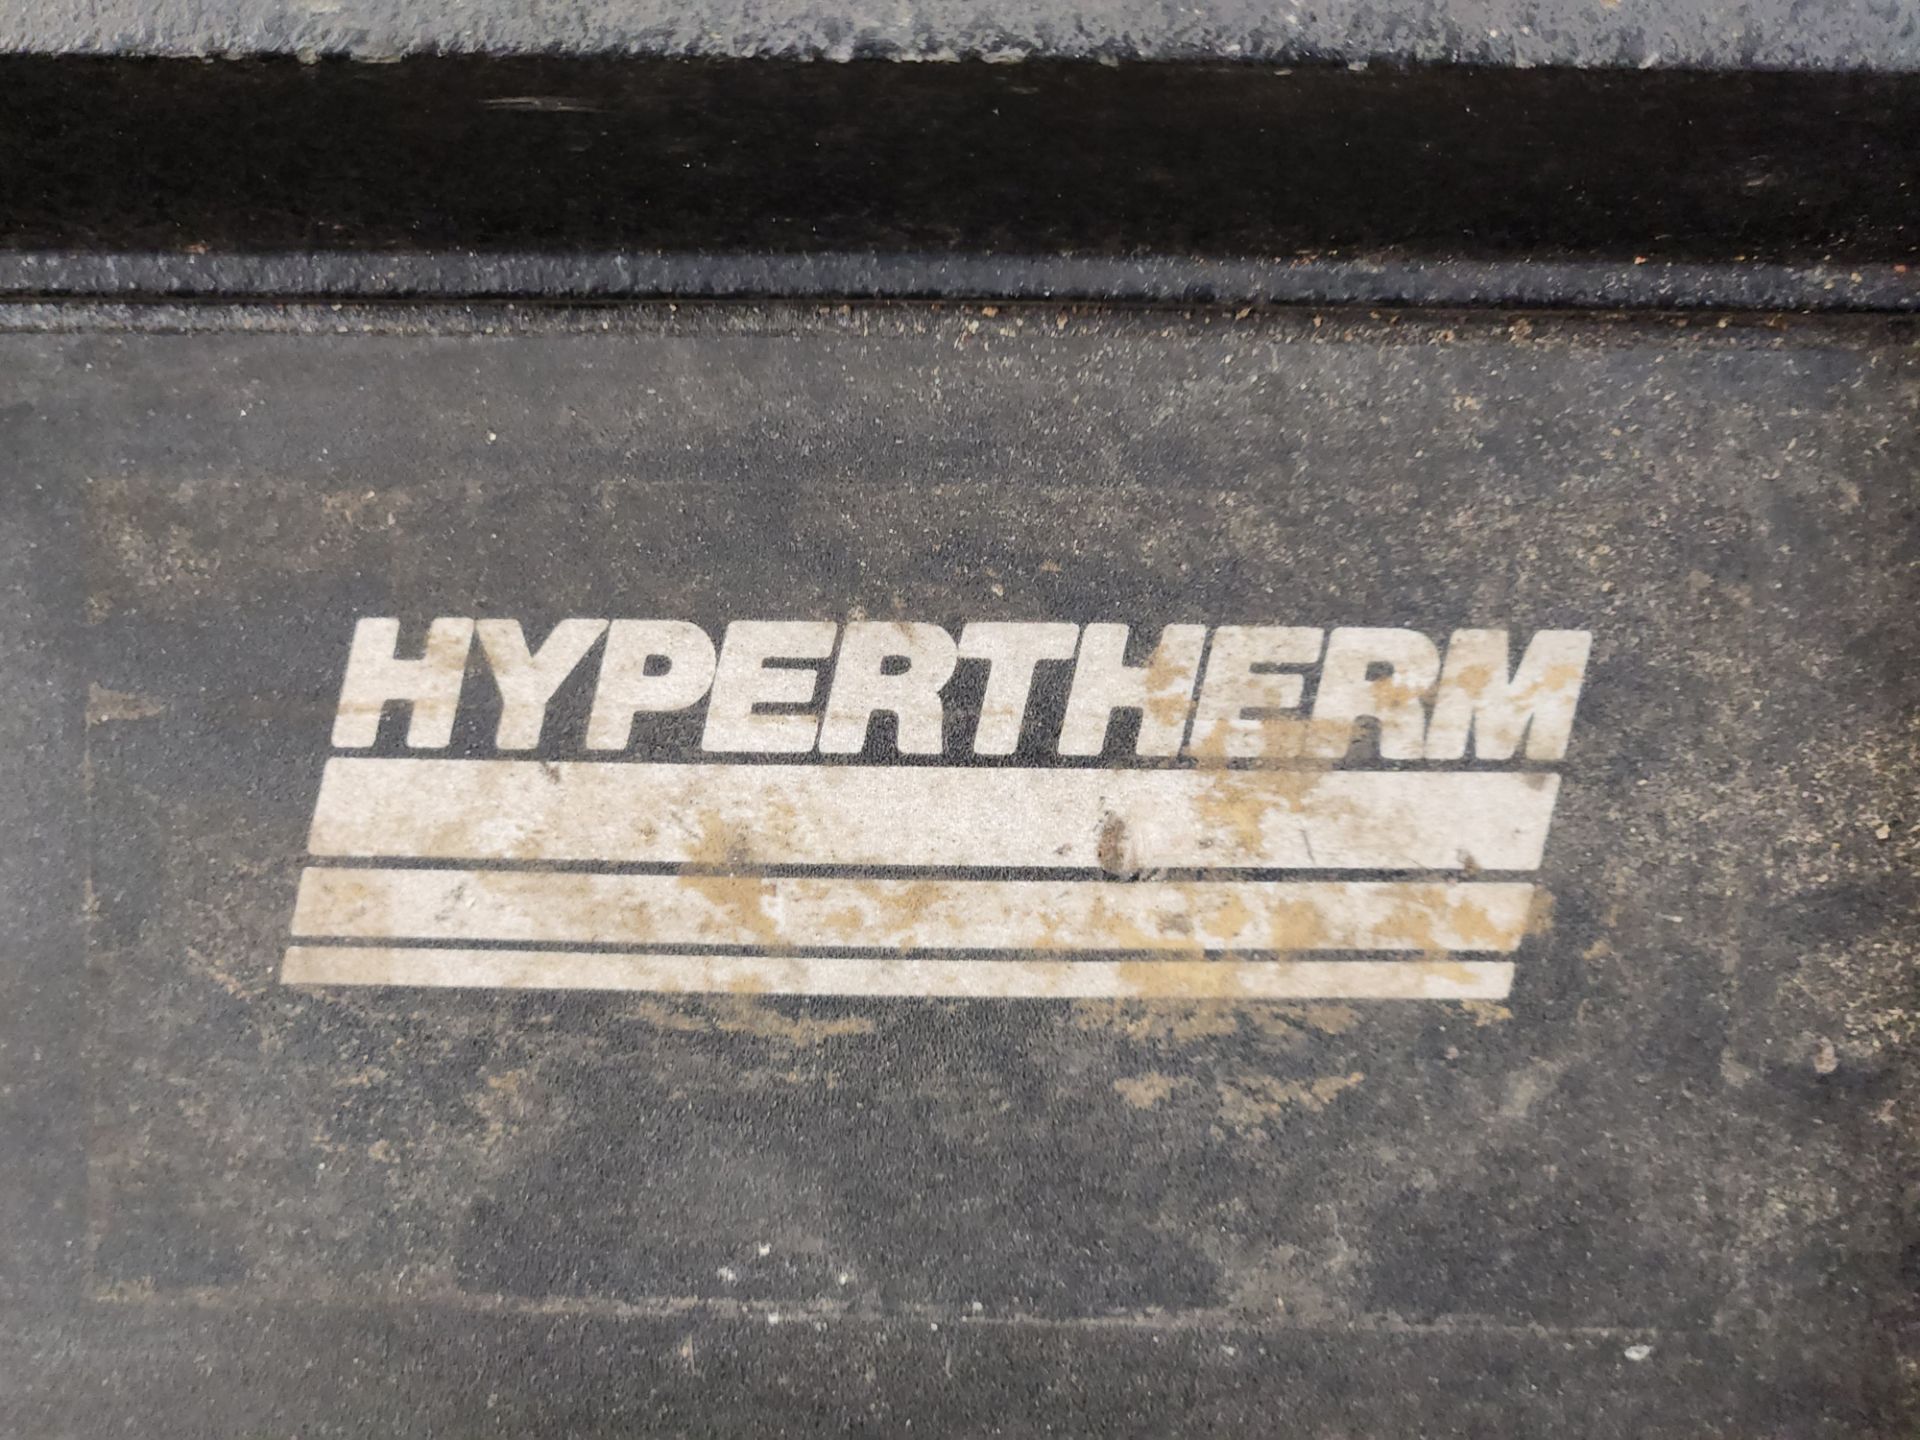 Hypertherm Max40 Plasma Cutter - Image 2 of 3